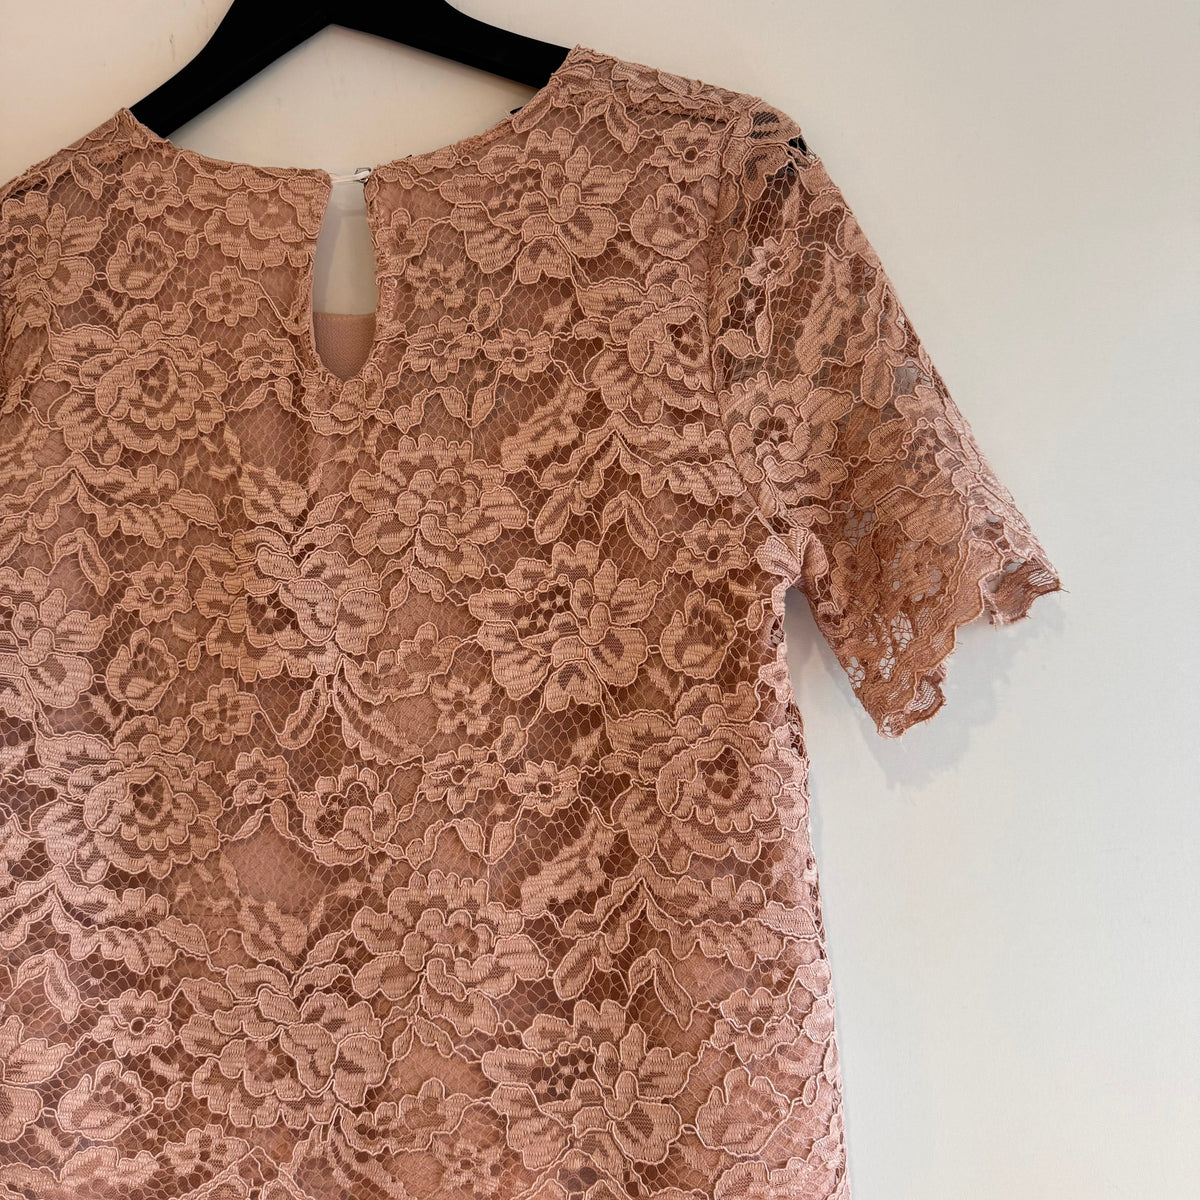 Le Streghe lacey occasion dress Blush Size small